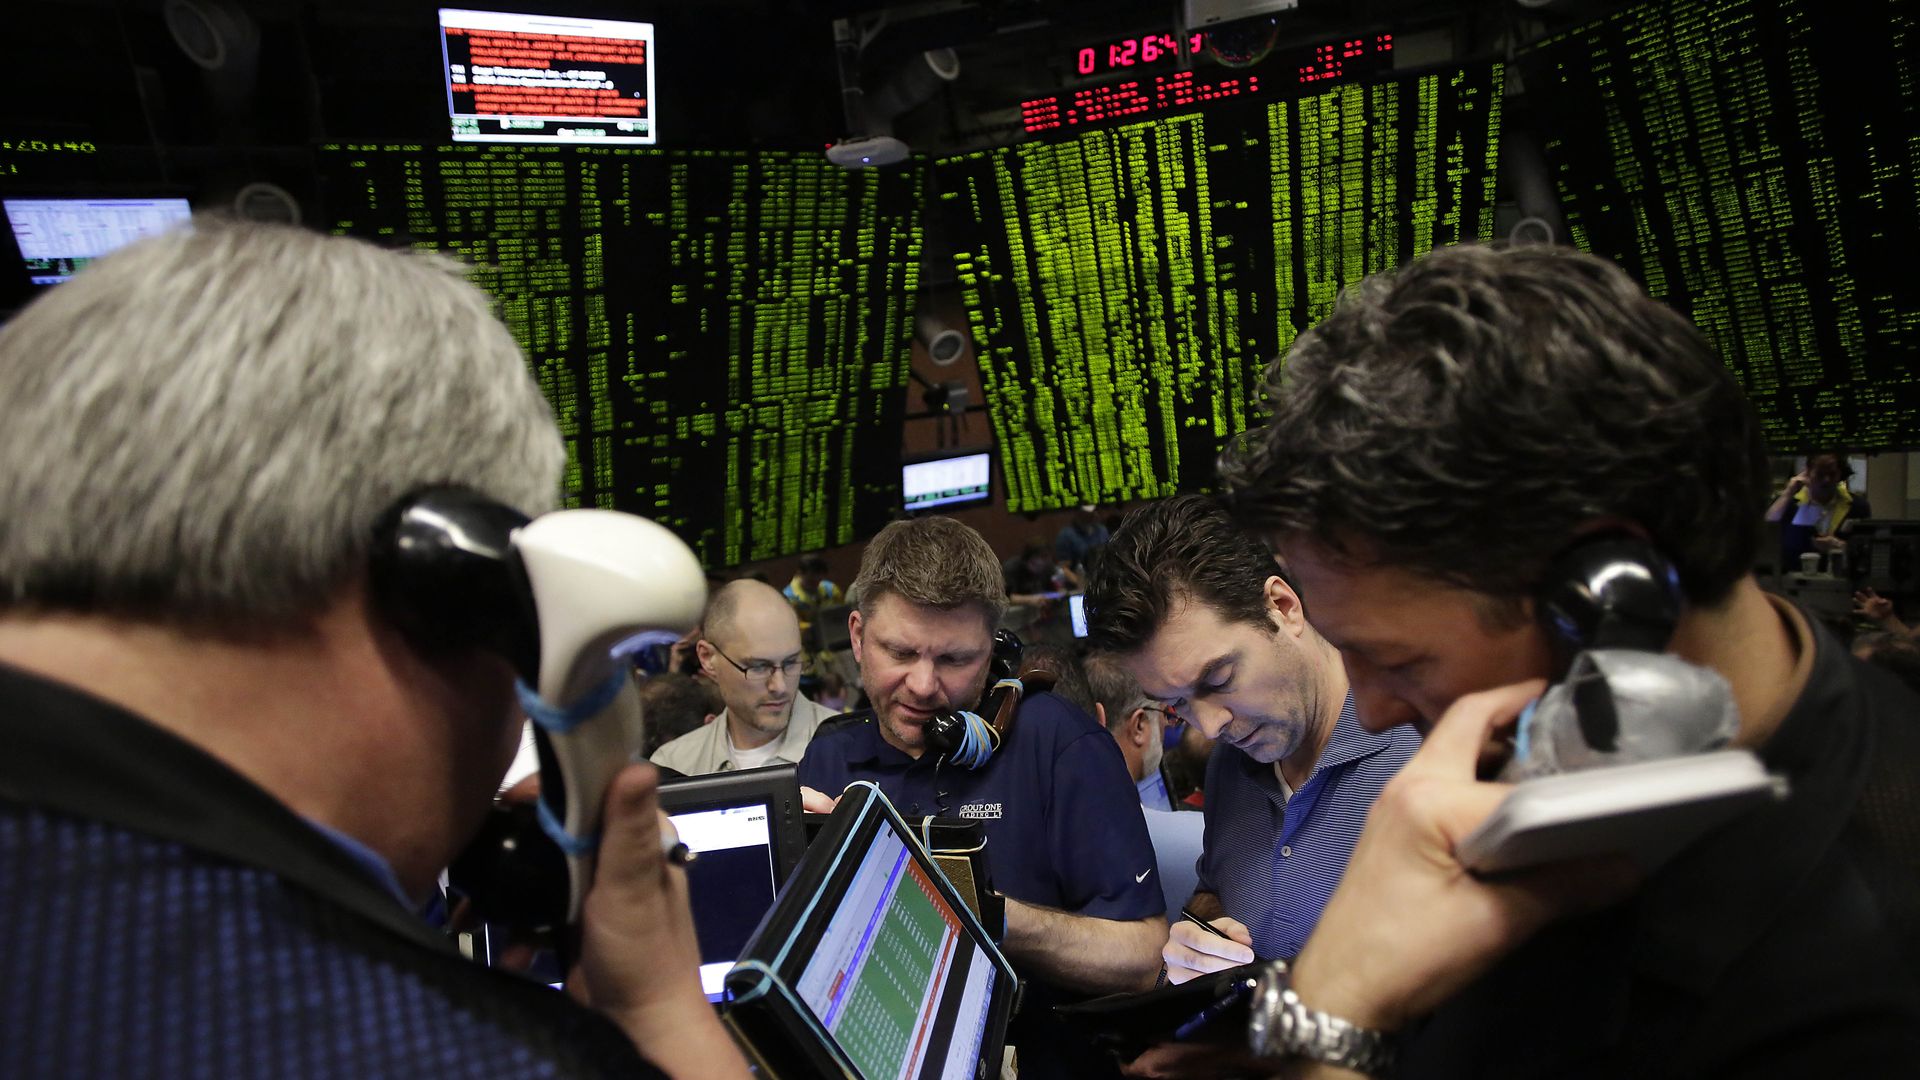 In this image, traders work at the stock market floor and take calls. 